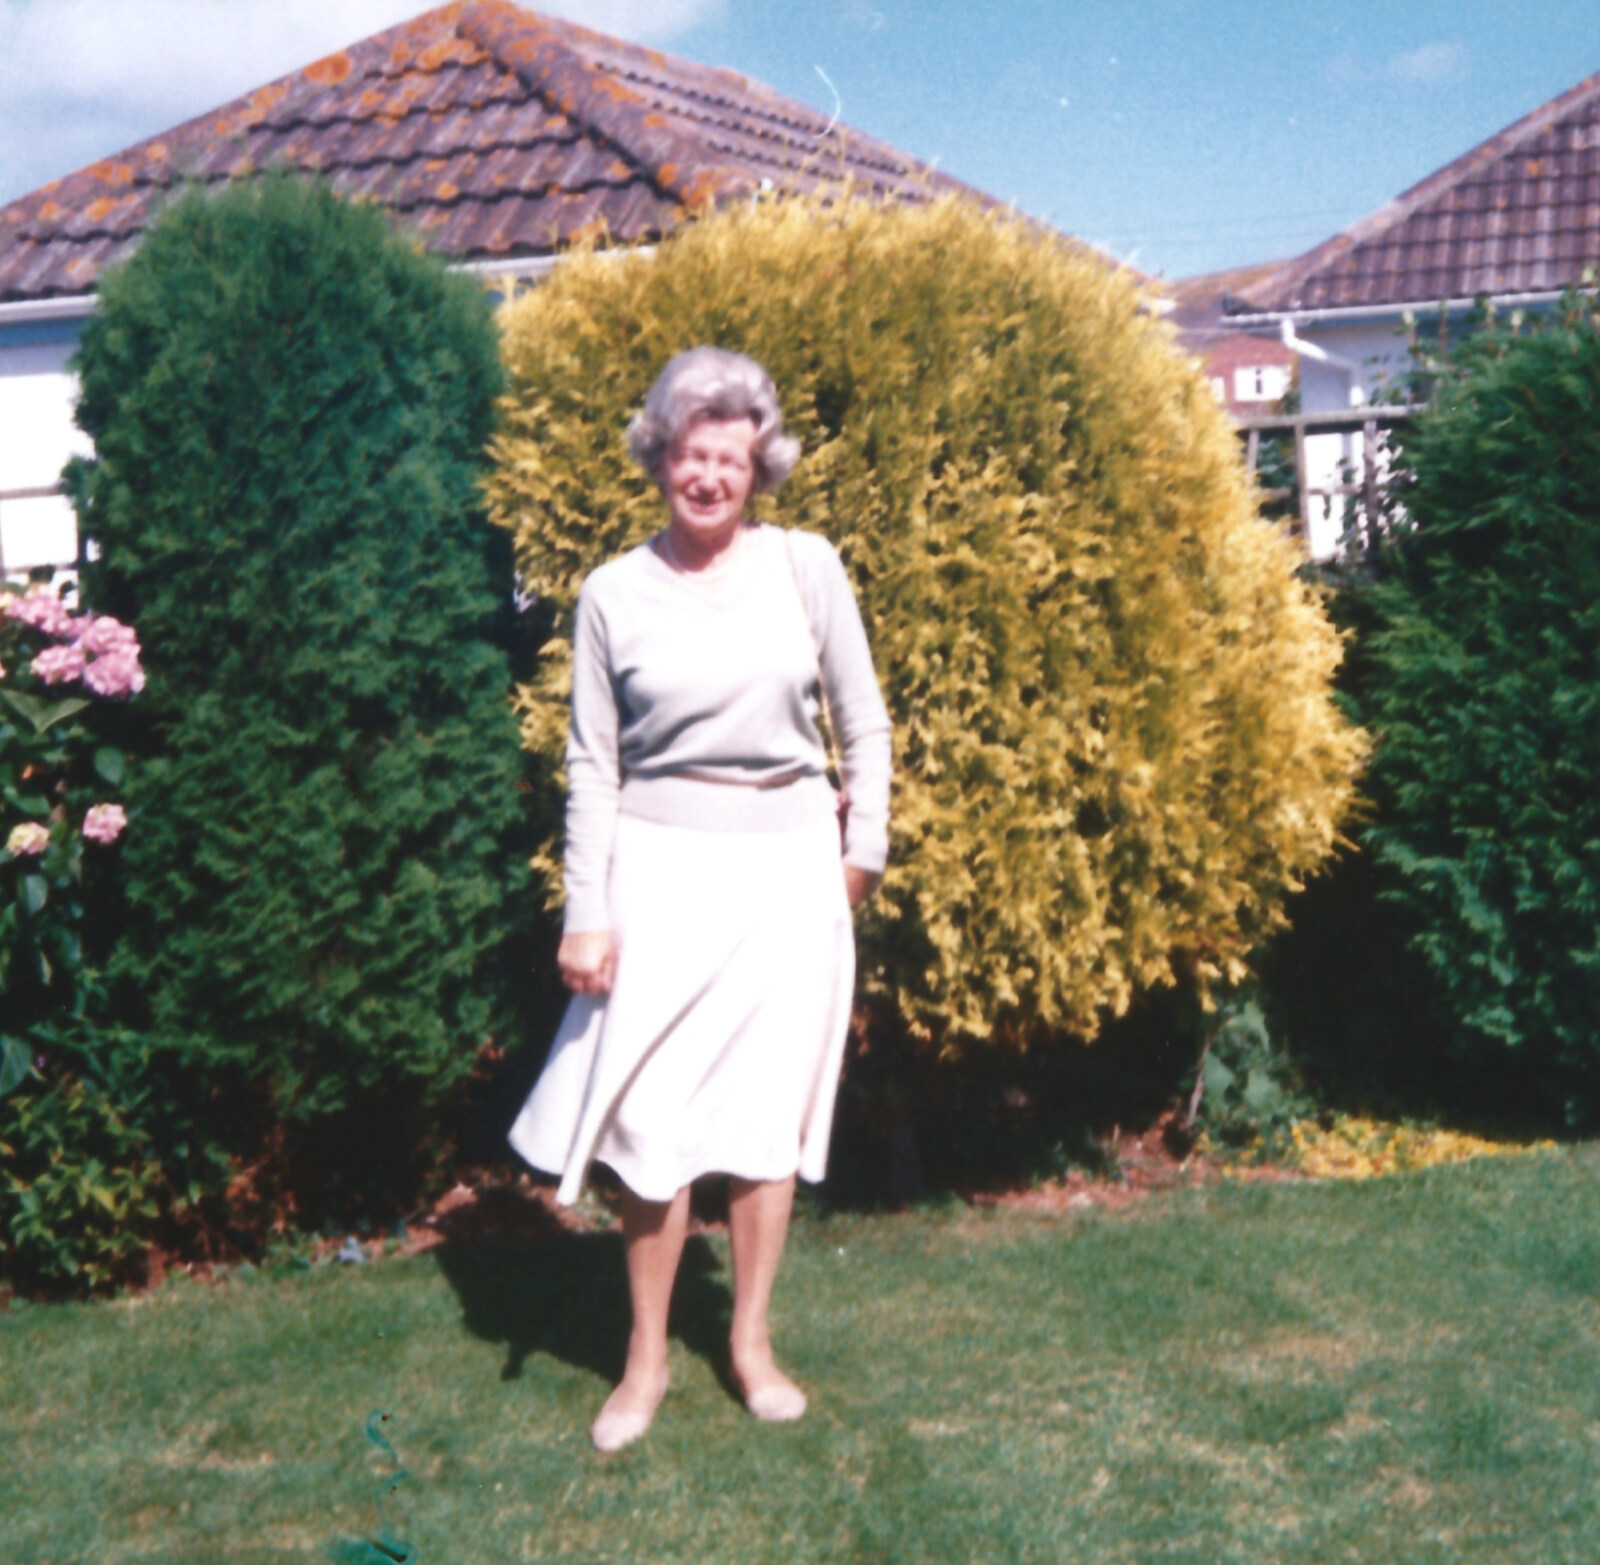 Family History: The 1980s - 24th January 2020: Grandmother in N&C's garden, July 1988